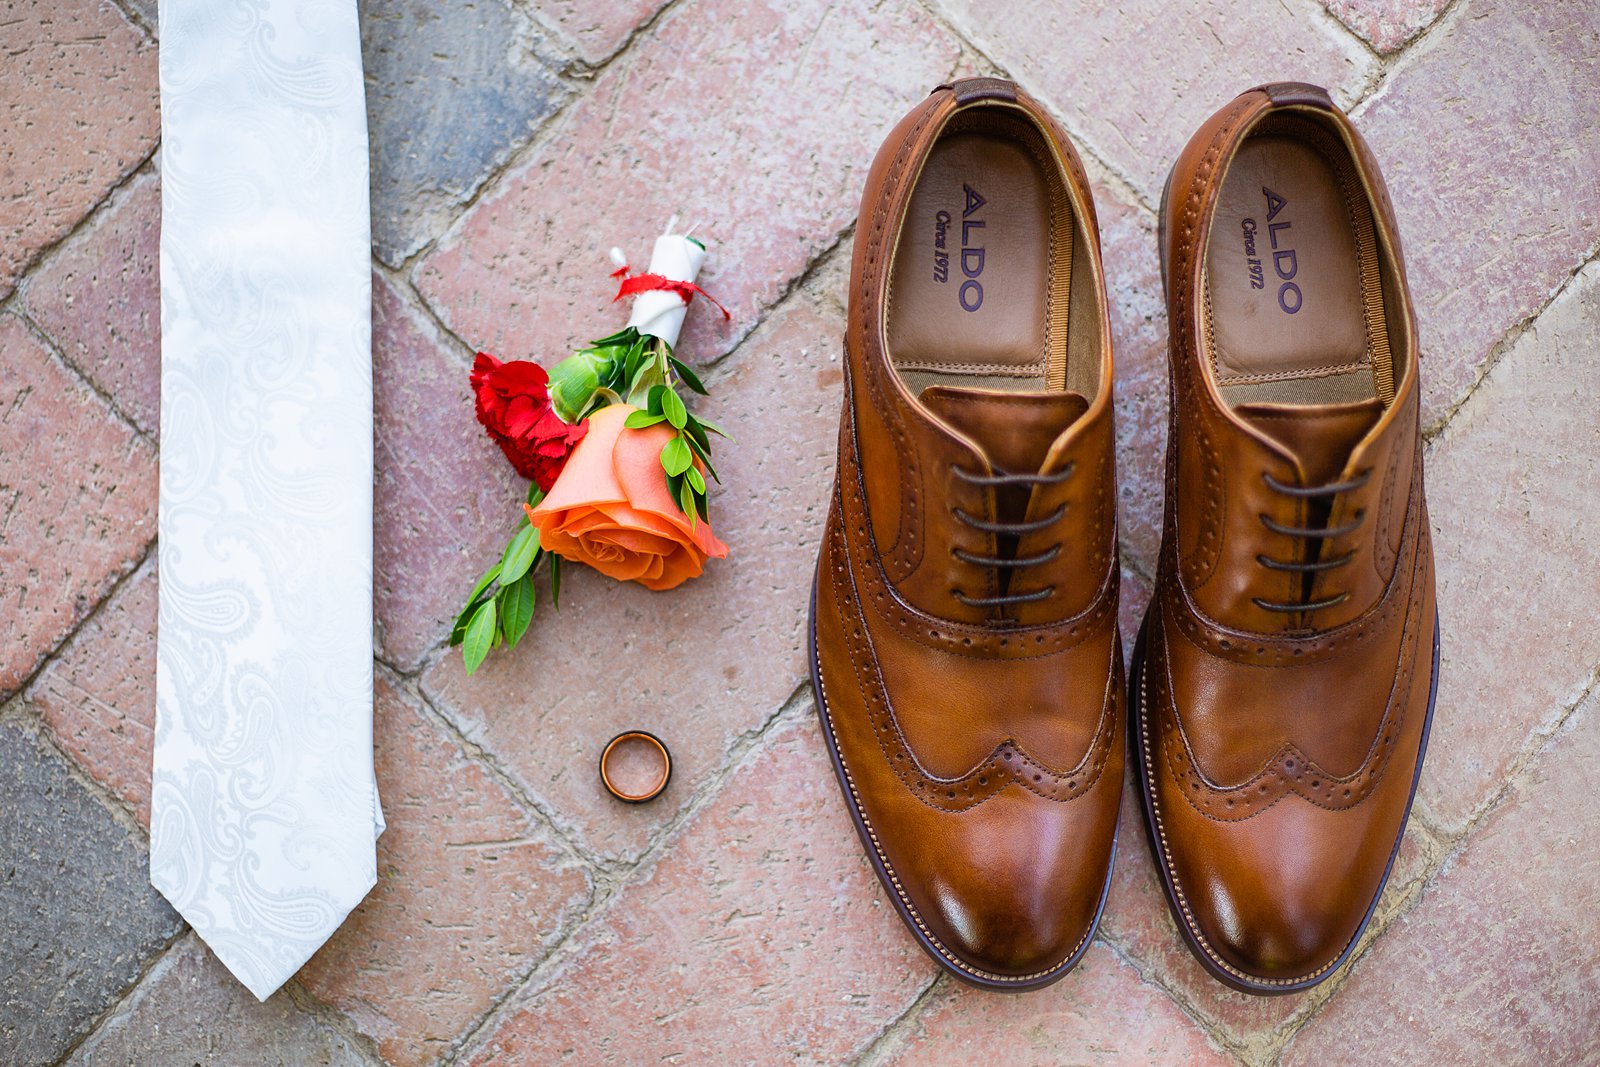 Groom's wedding day details of a white tie, colorful boutonniere, brown leather oxford shoes, and Manly Bands wedding ring by PMA Photography.